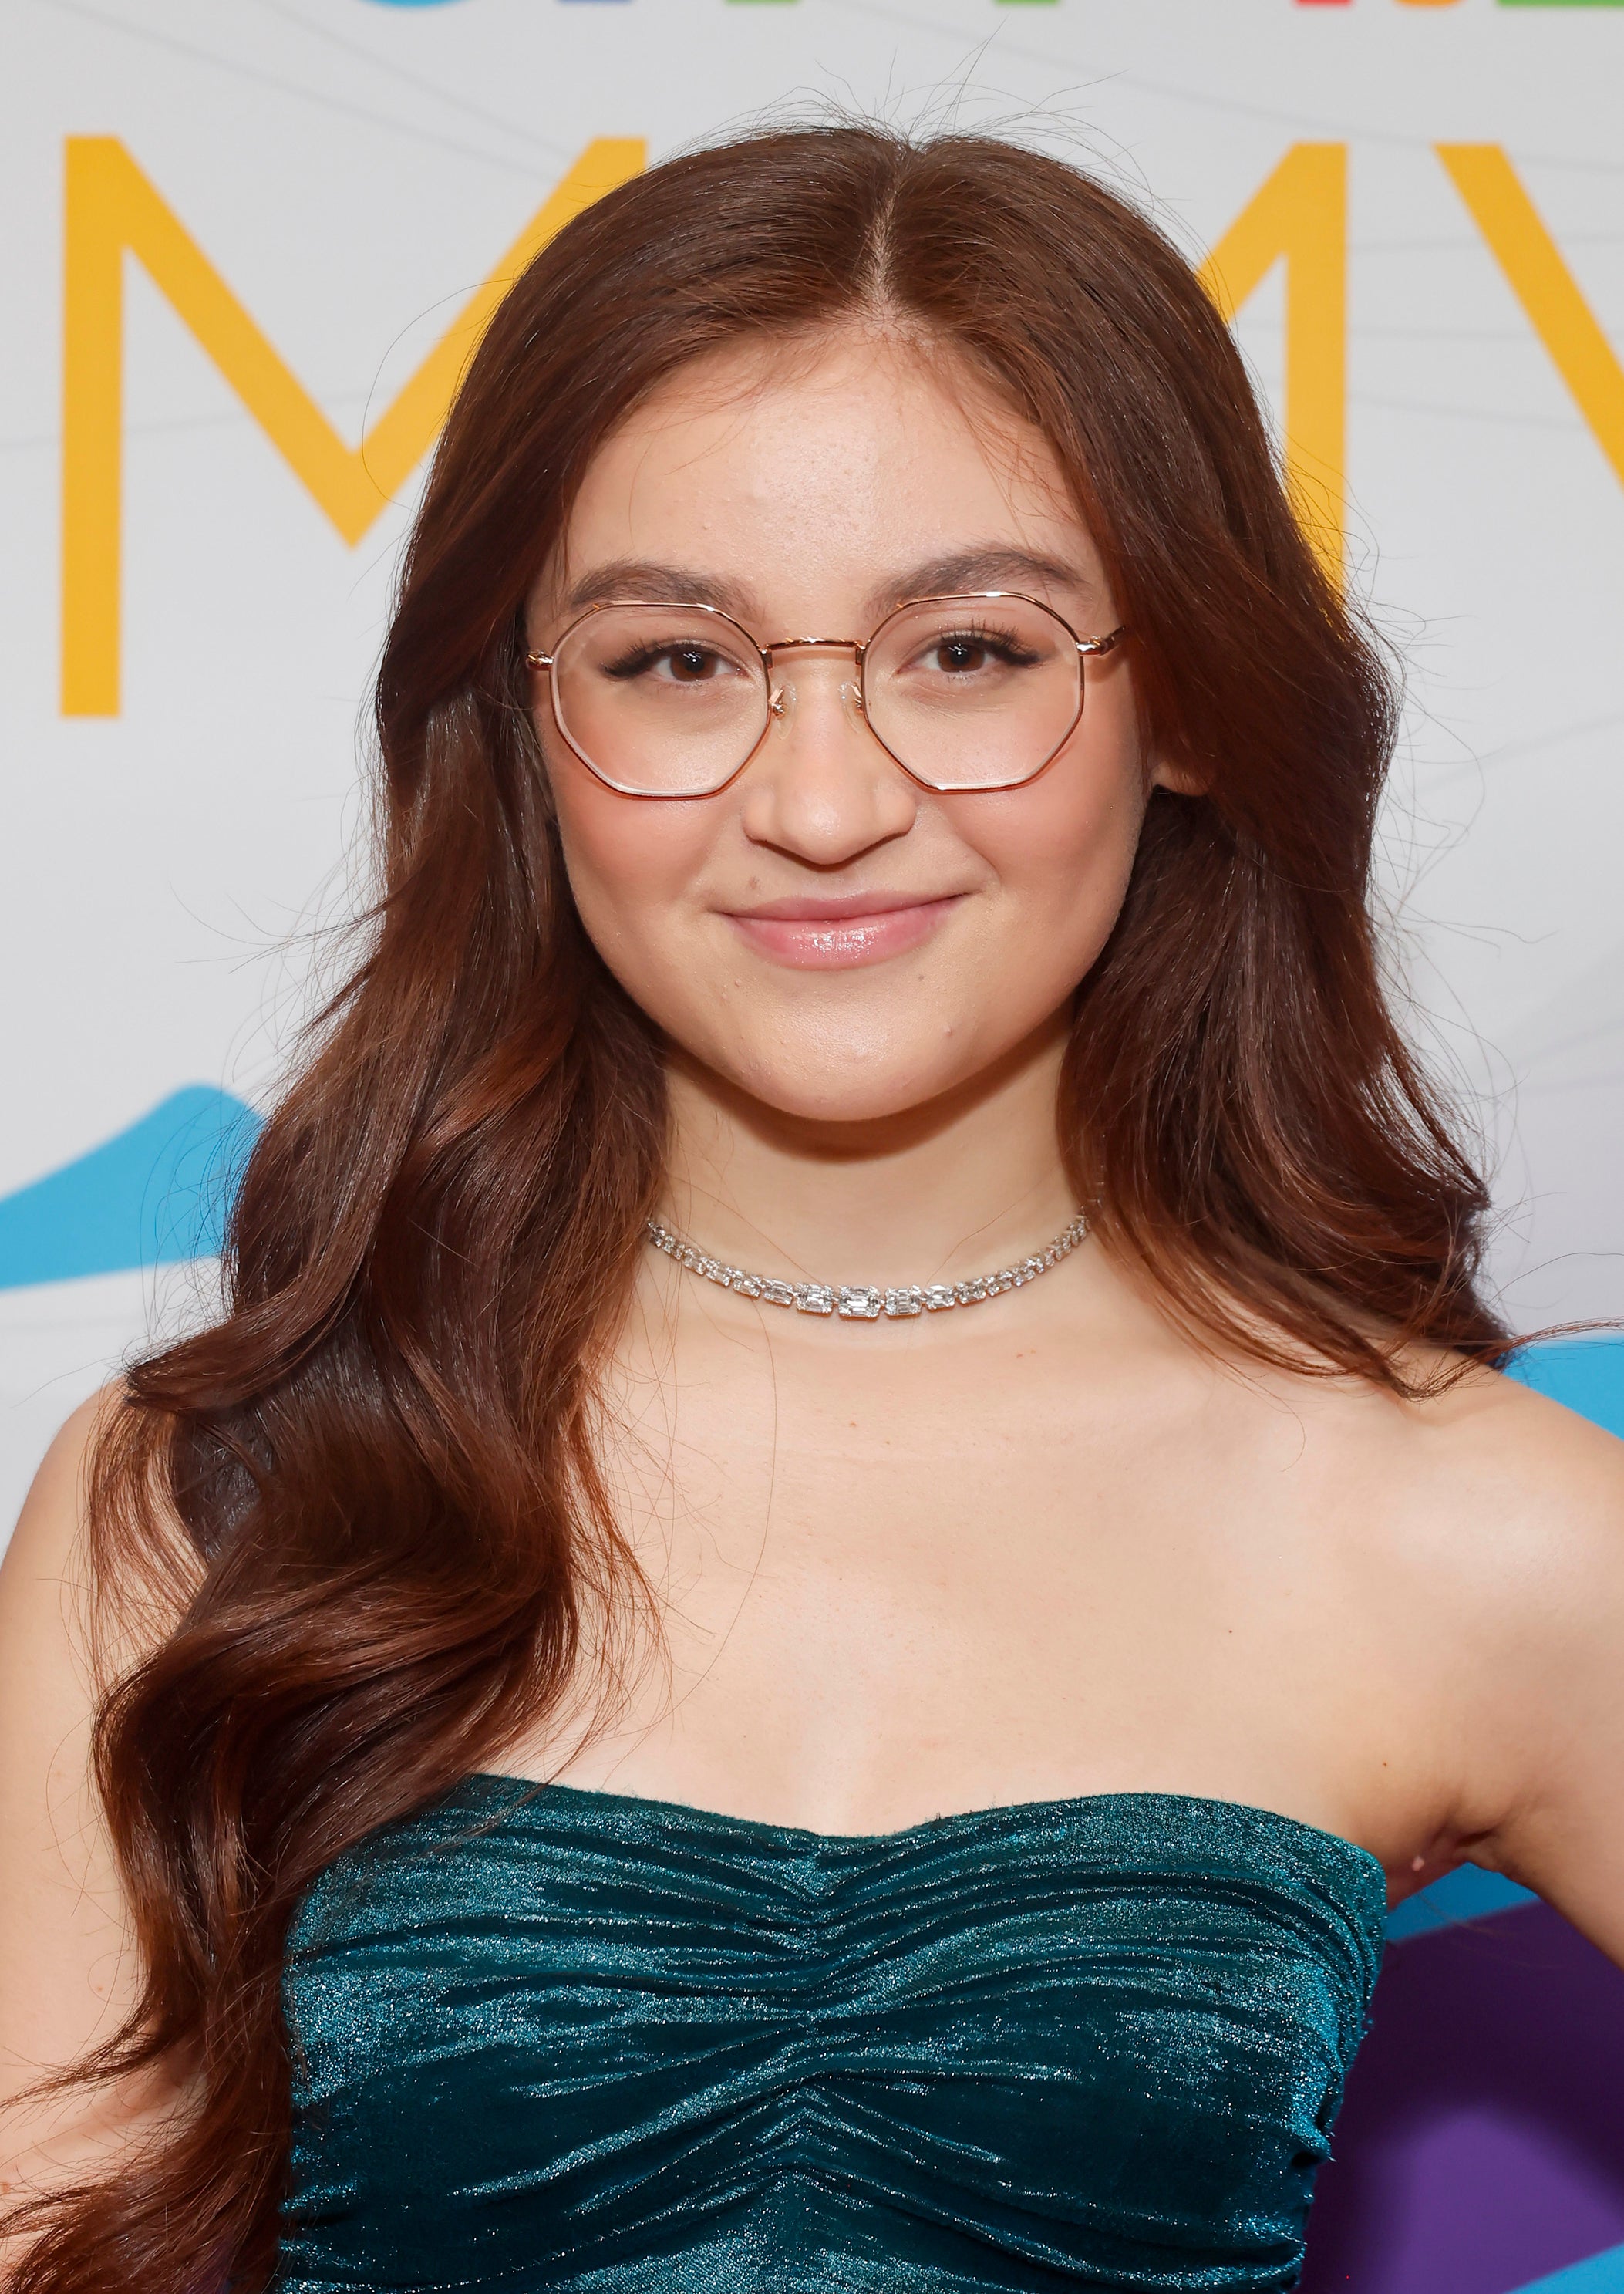 Anna Cathcart at event wearing a teal strapless top and a choker necklace